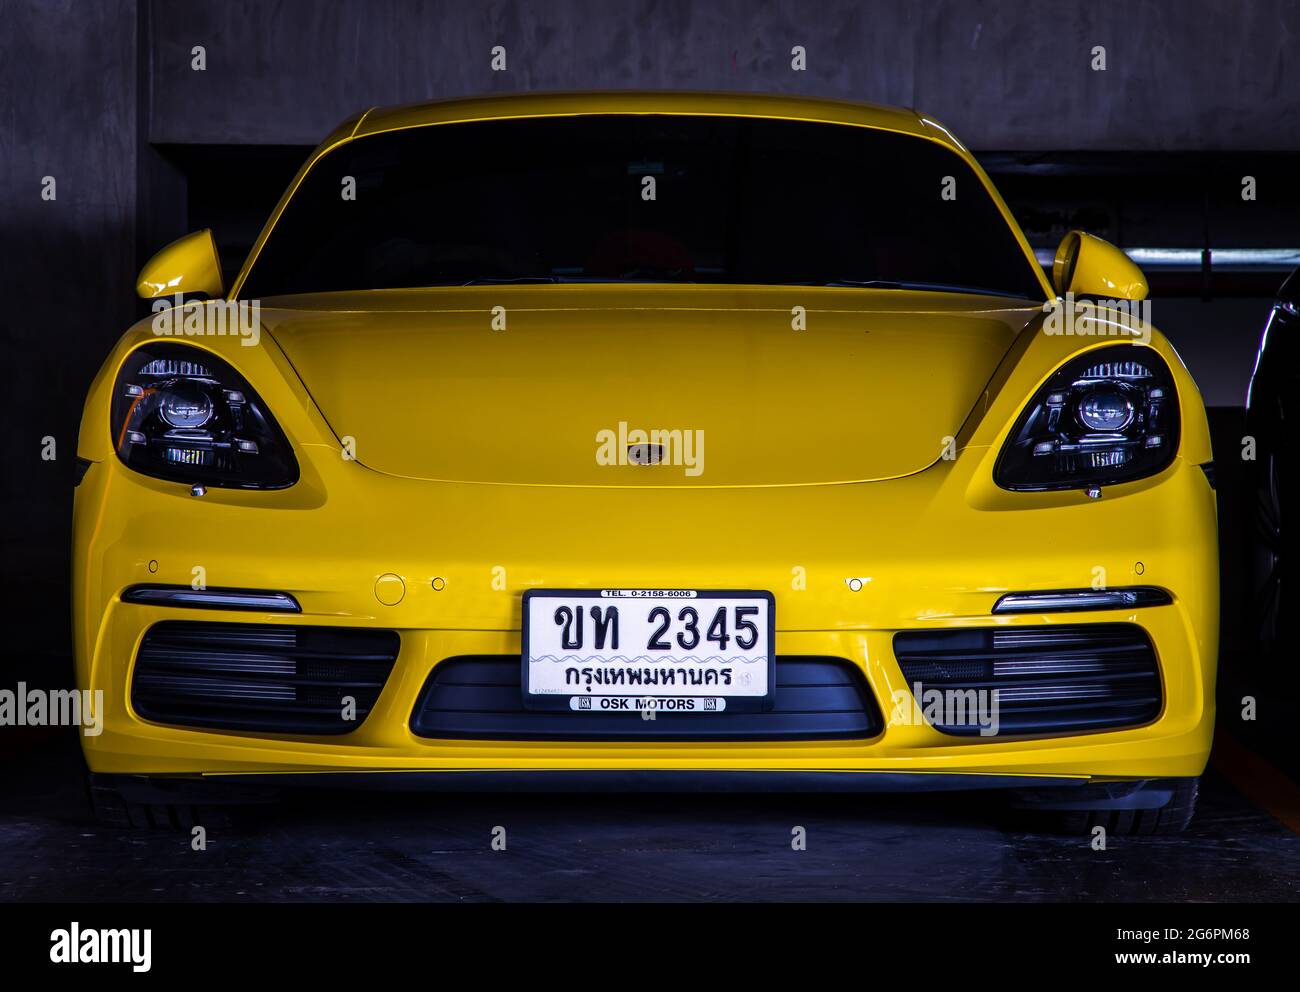 Bangkok, Thailand - 30 Jun 2021 : Front view shot of Yellow porsche sports car parked in the parking lot. Selective focus. Stock Photo